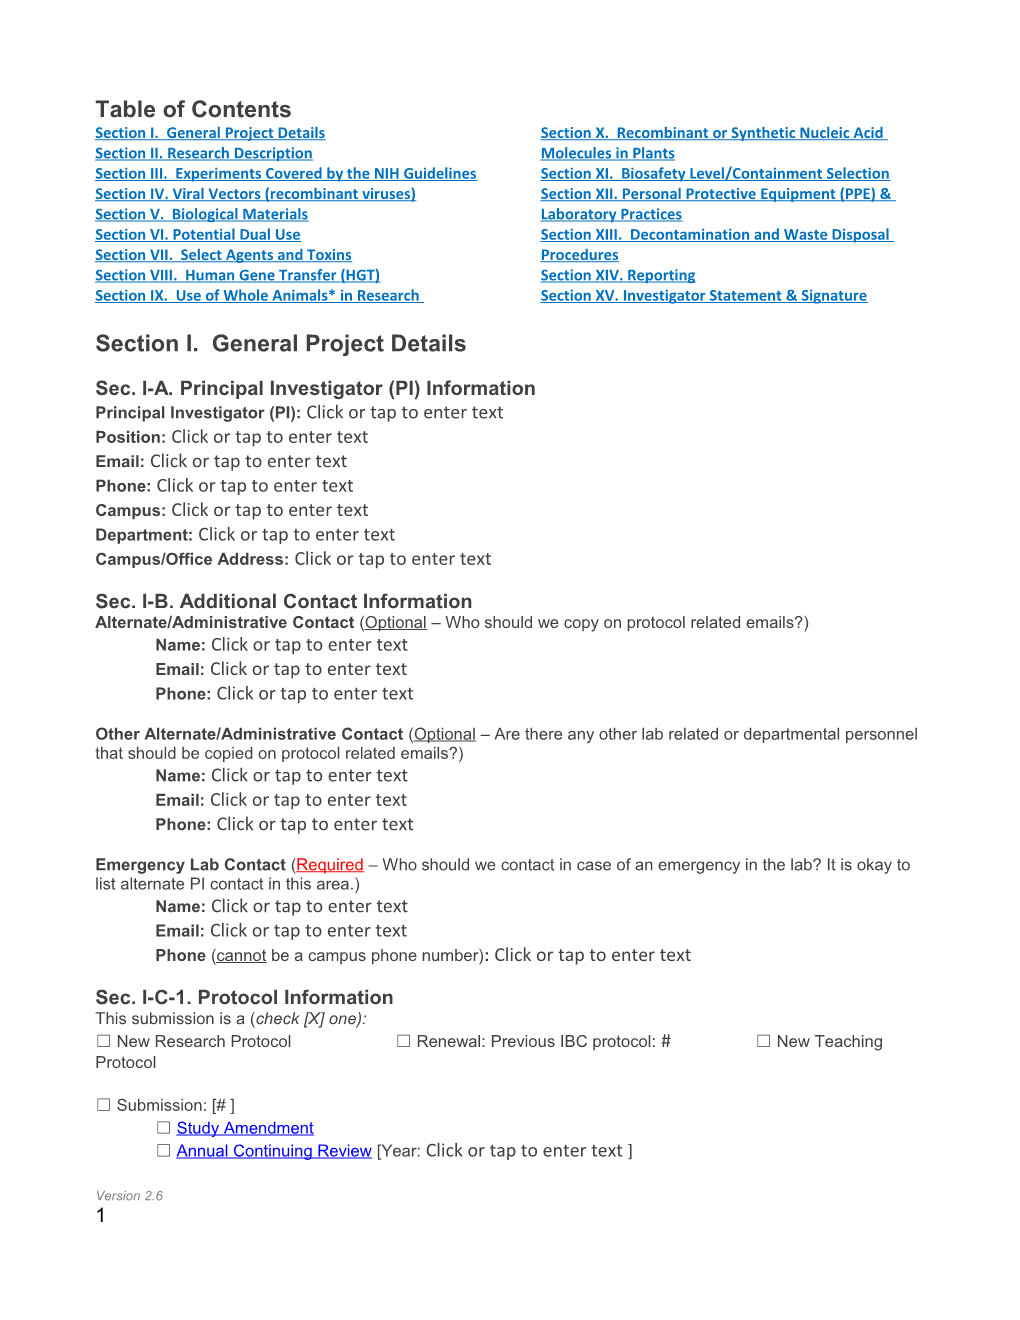 Section I. General Project Details